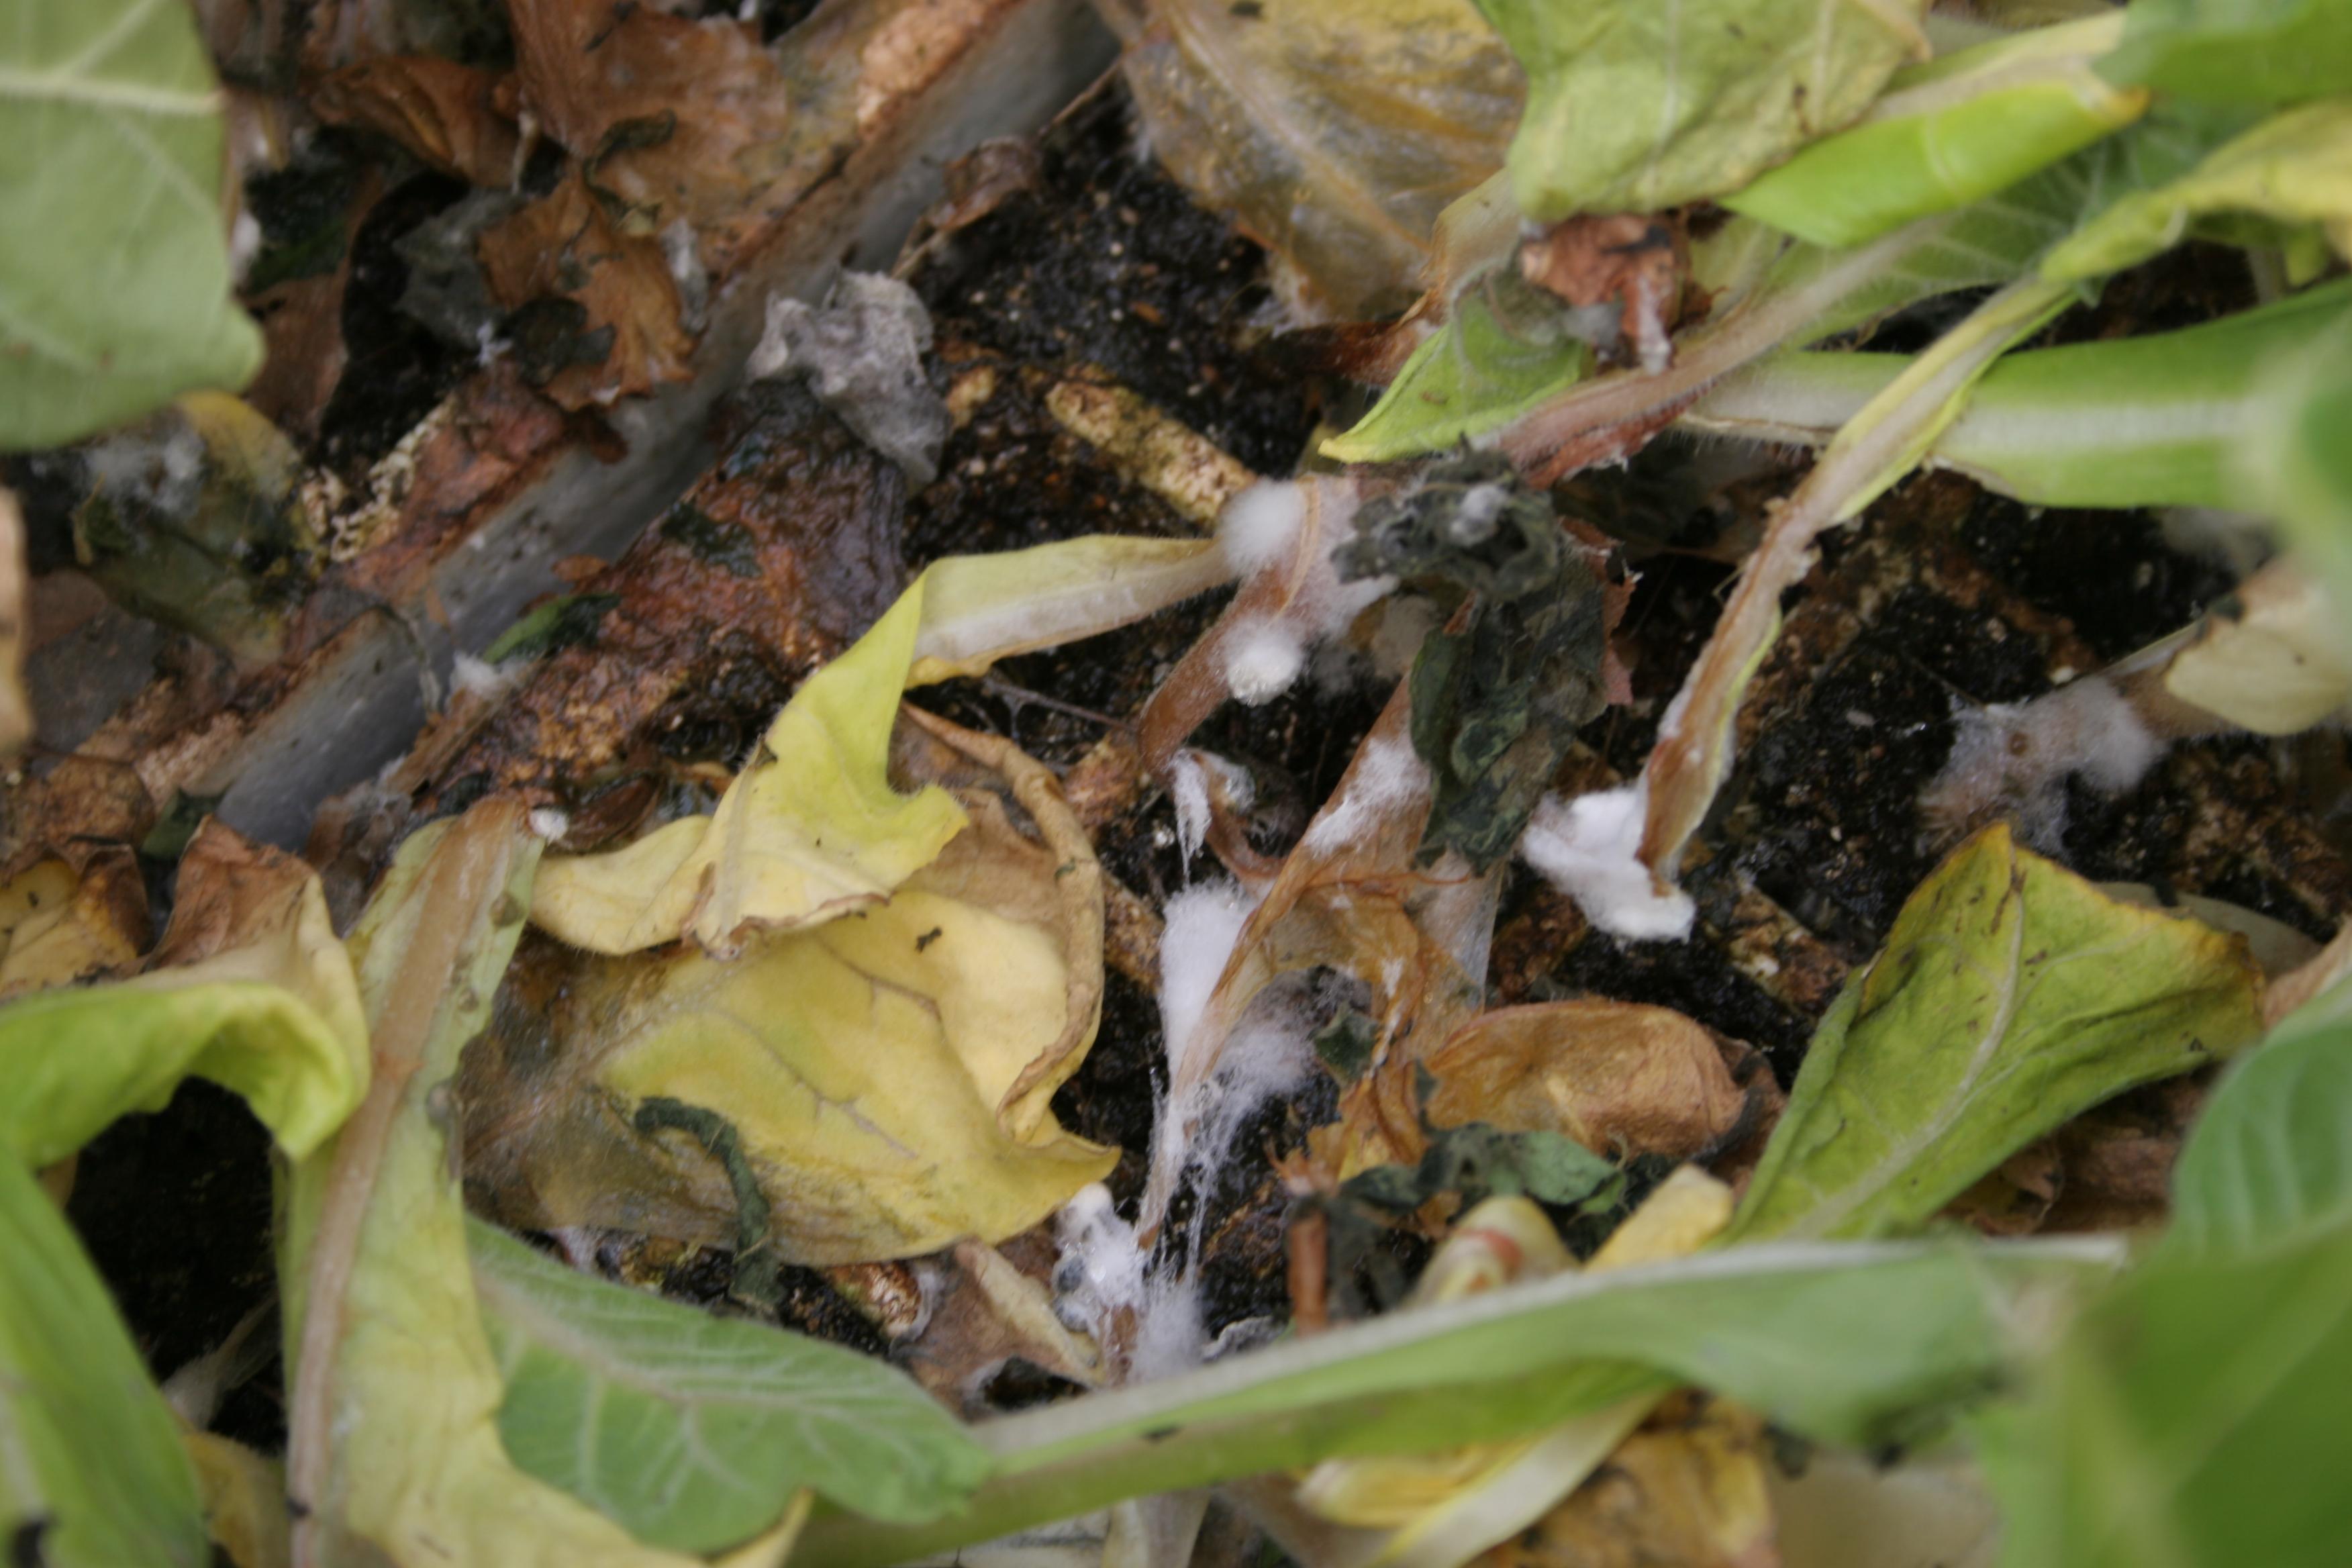 The Sclerotinia fungus eventually produces dense, white fungal growth (mycelia) on infected tissues.  Roundish white tufts of mycelia will develop into irregularly-shaped, hard, black sclerotia, which may range in size from a mustard seed to a raisin. (Photo: Kenneth Seebold, UK)